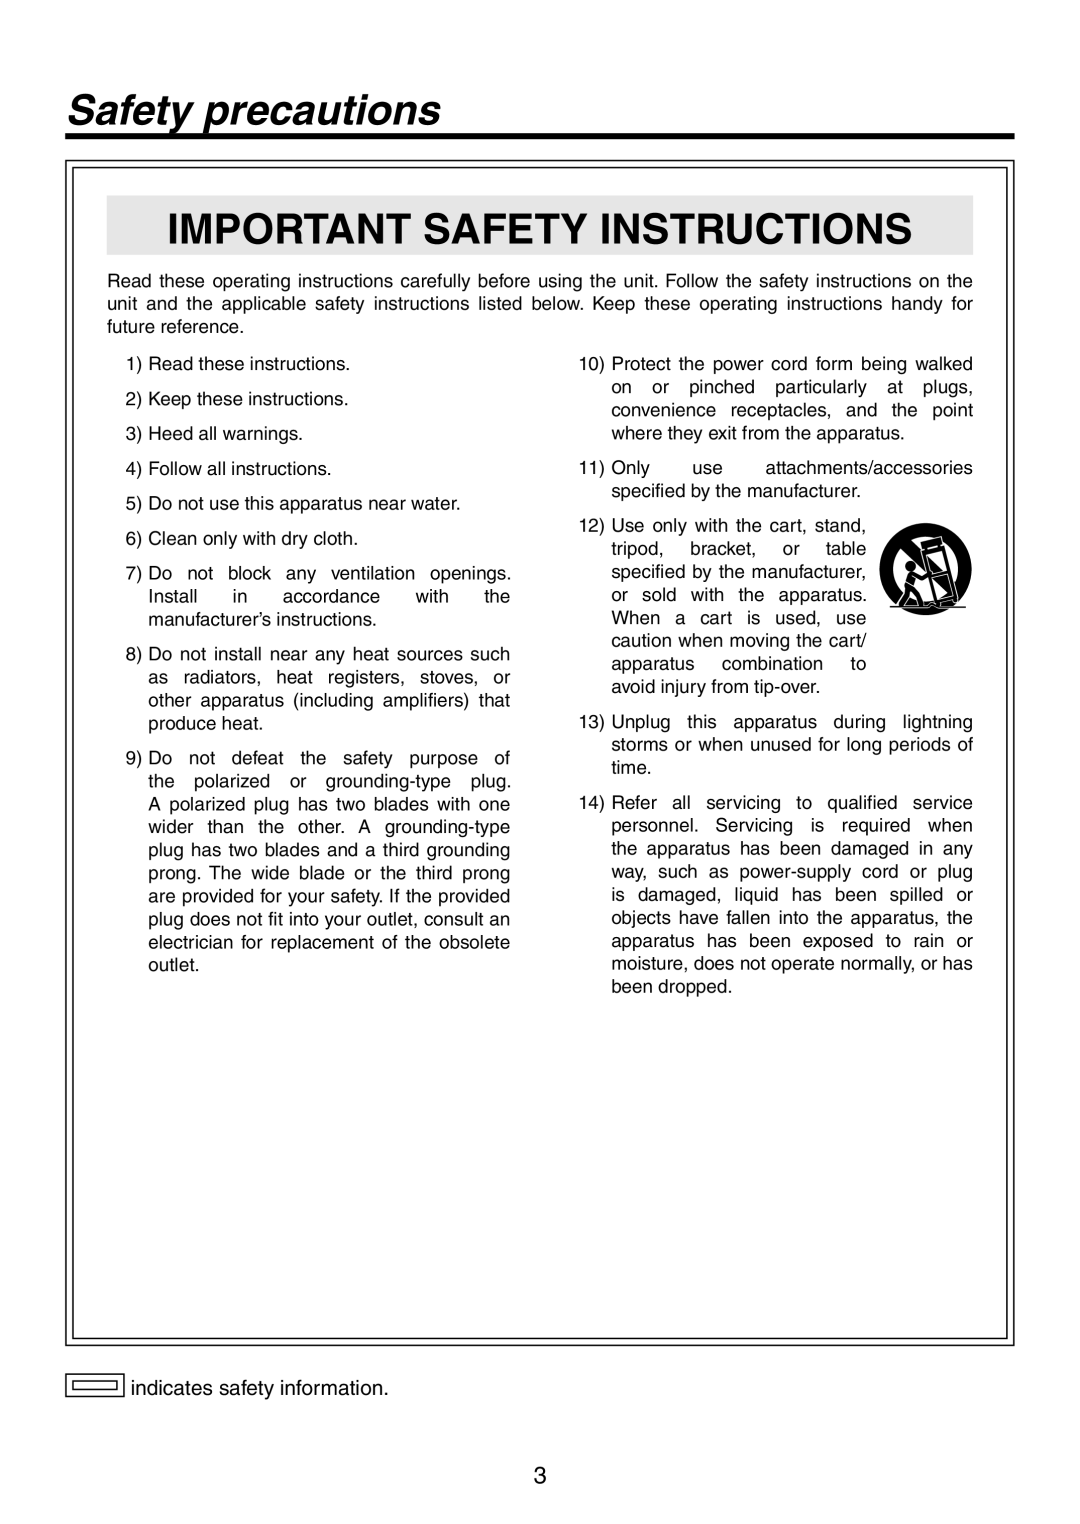 Panasonic AW-HS50N operating instructions Safety precautions, Important Safety Instructions, indicates safety information 